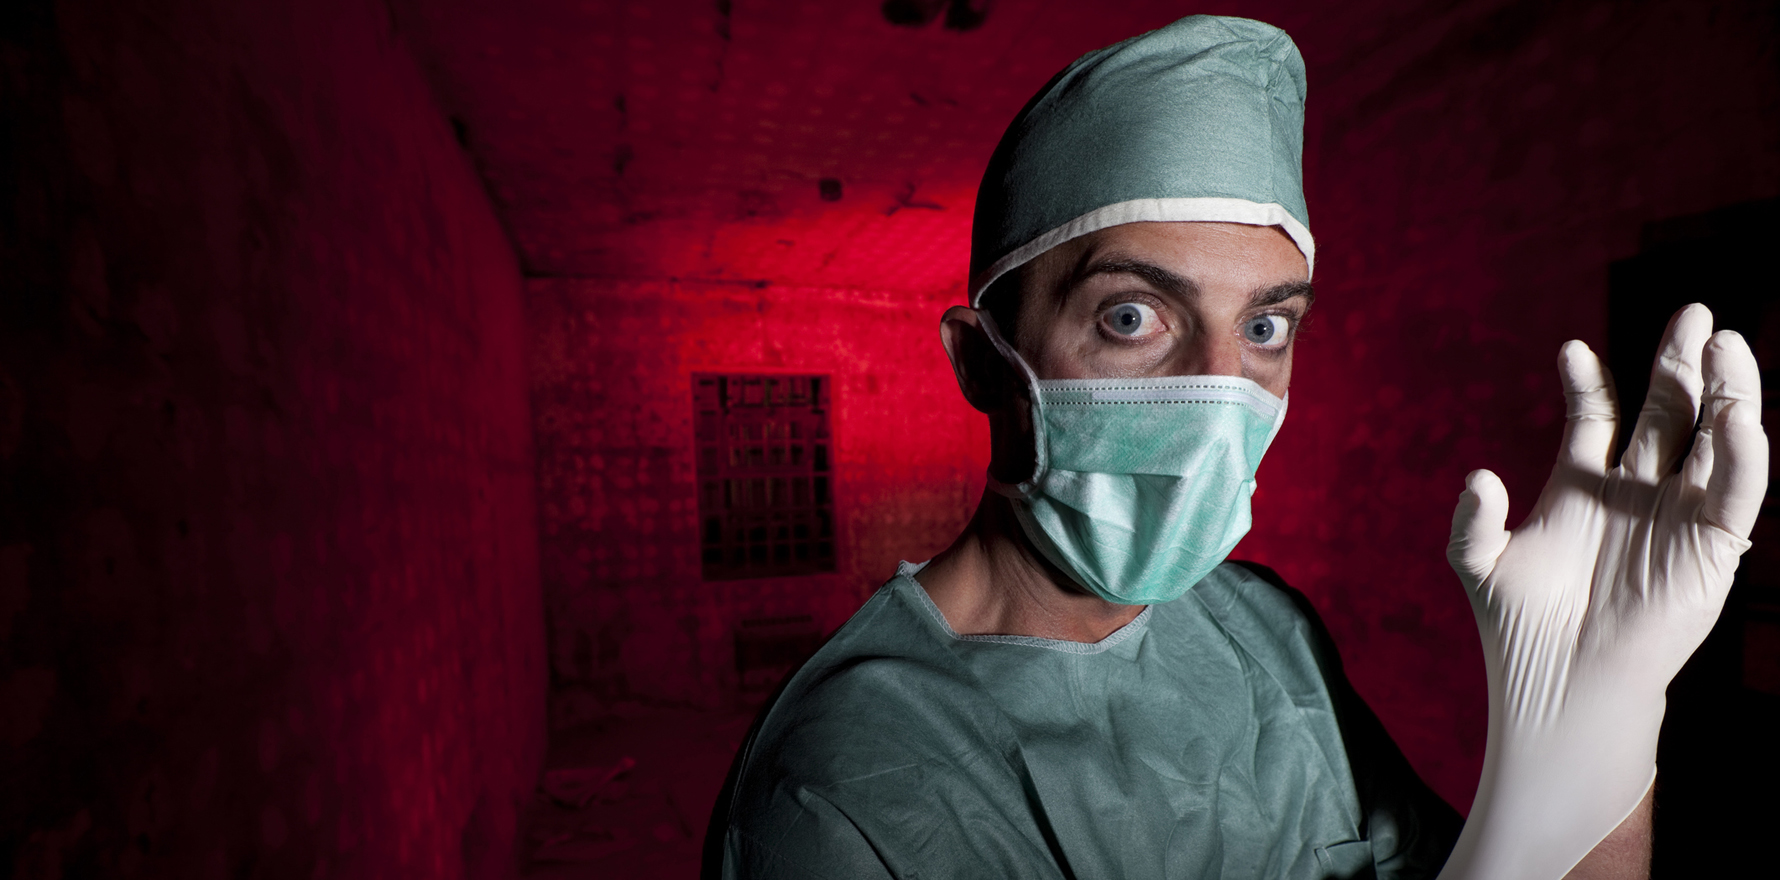 10 Most ABSURD and BARBARIC medical procedures, surgeries and “treatments” ever